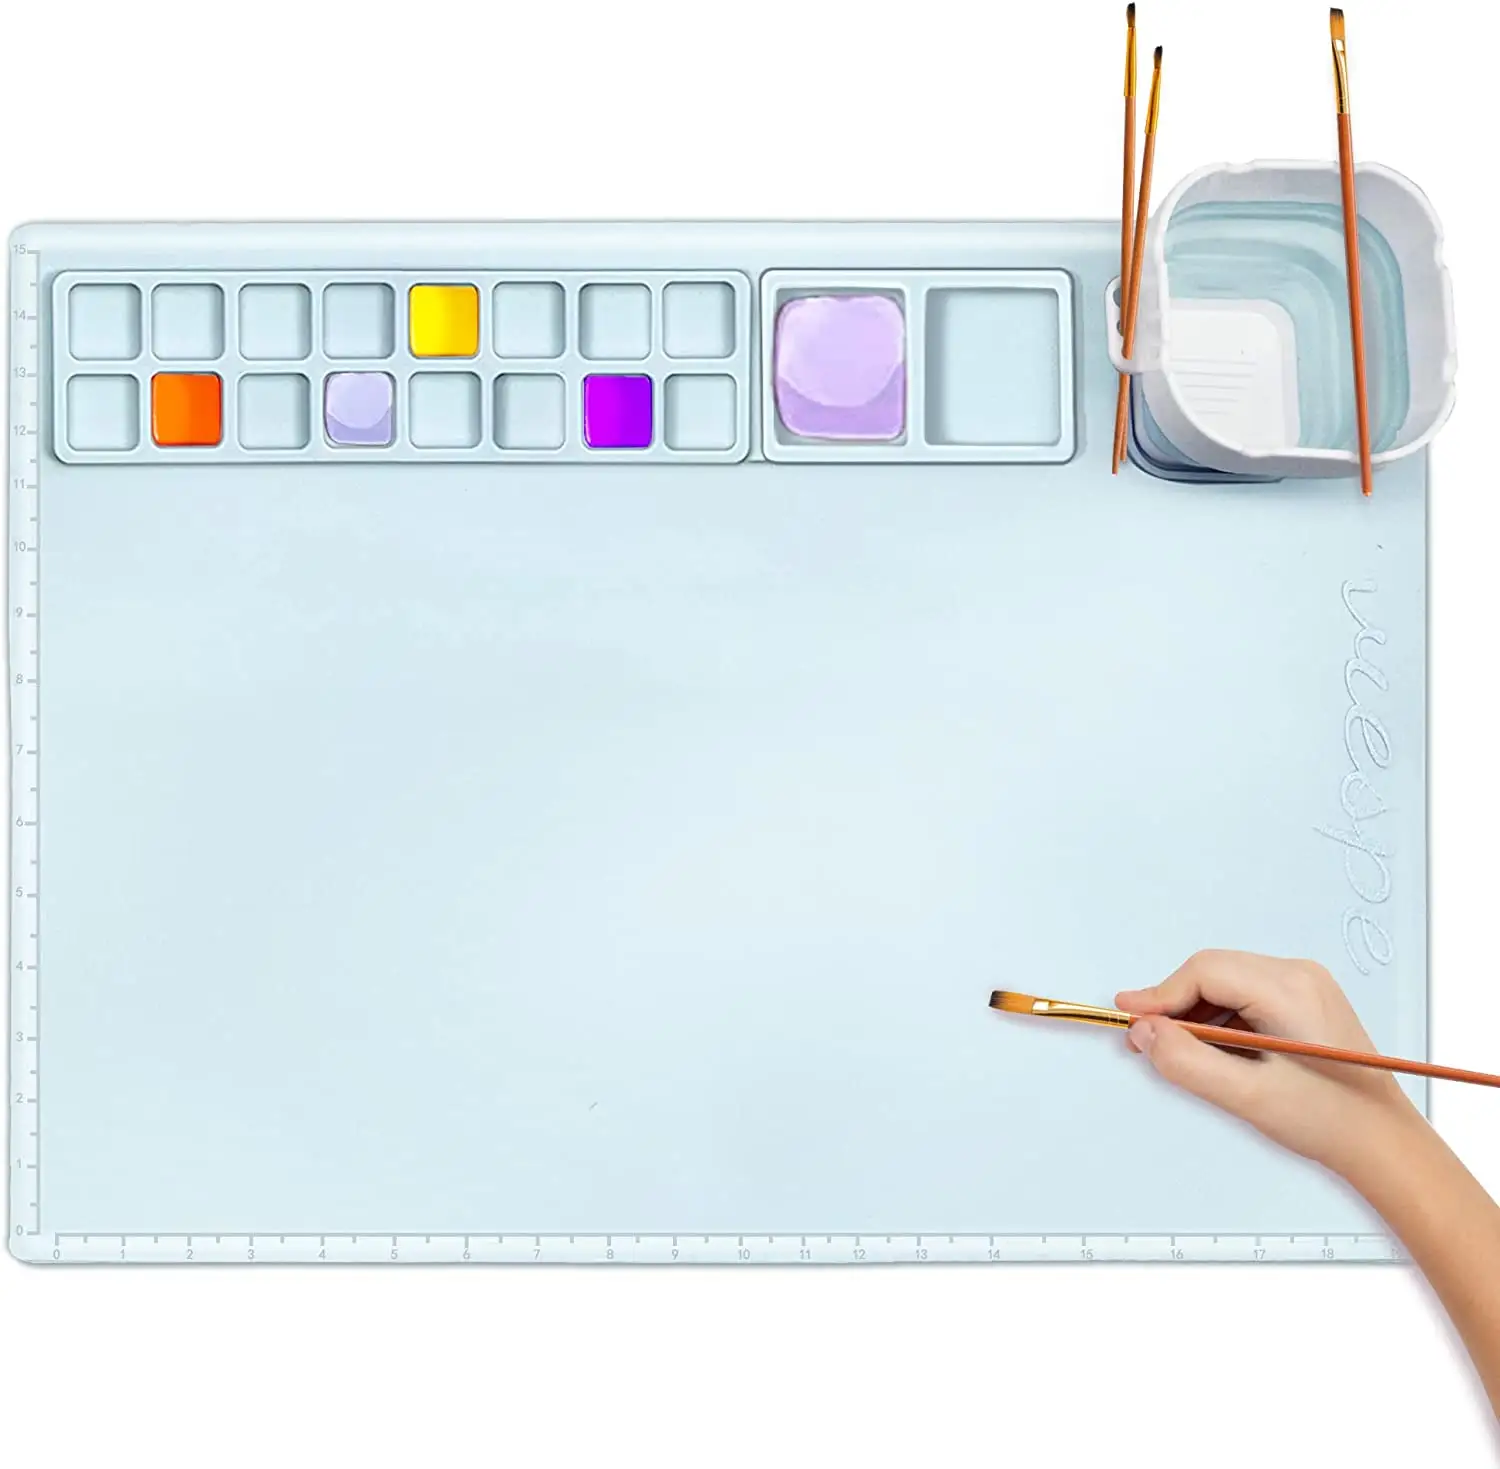 Silicone Painting Mat - 20"*16" Silicone Art Mat with 1 Water Cup for Kids - Silicone Craft Mat has 12 Color Dividers